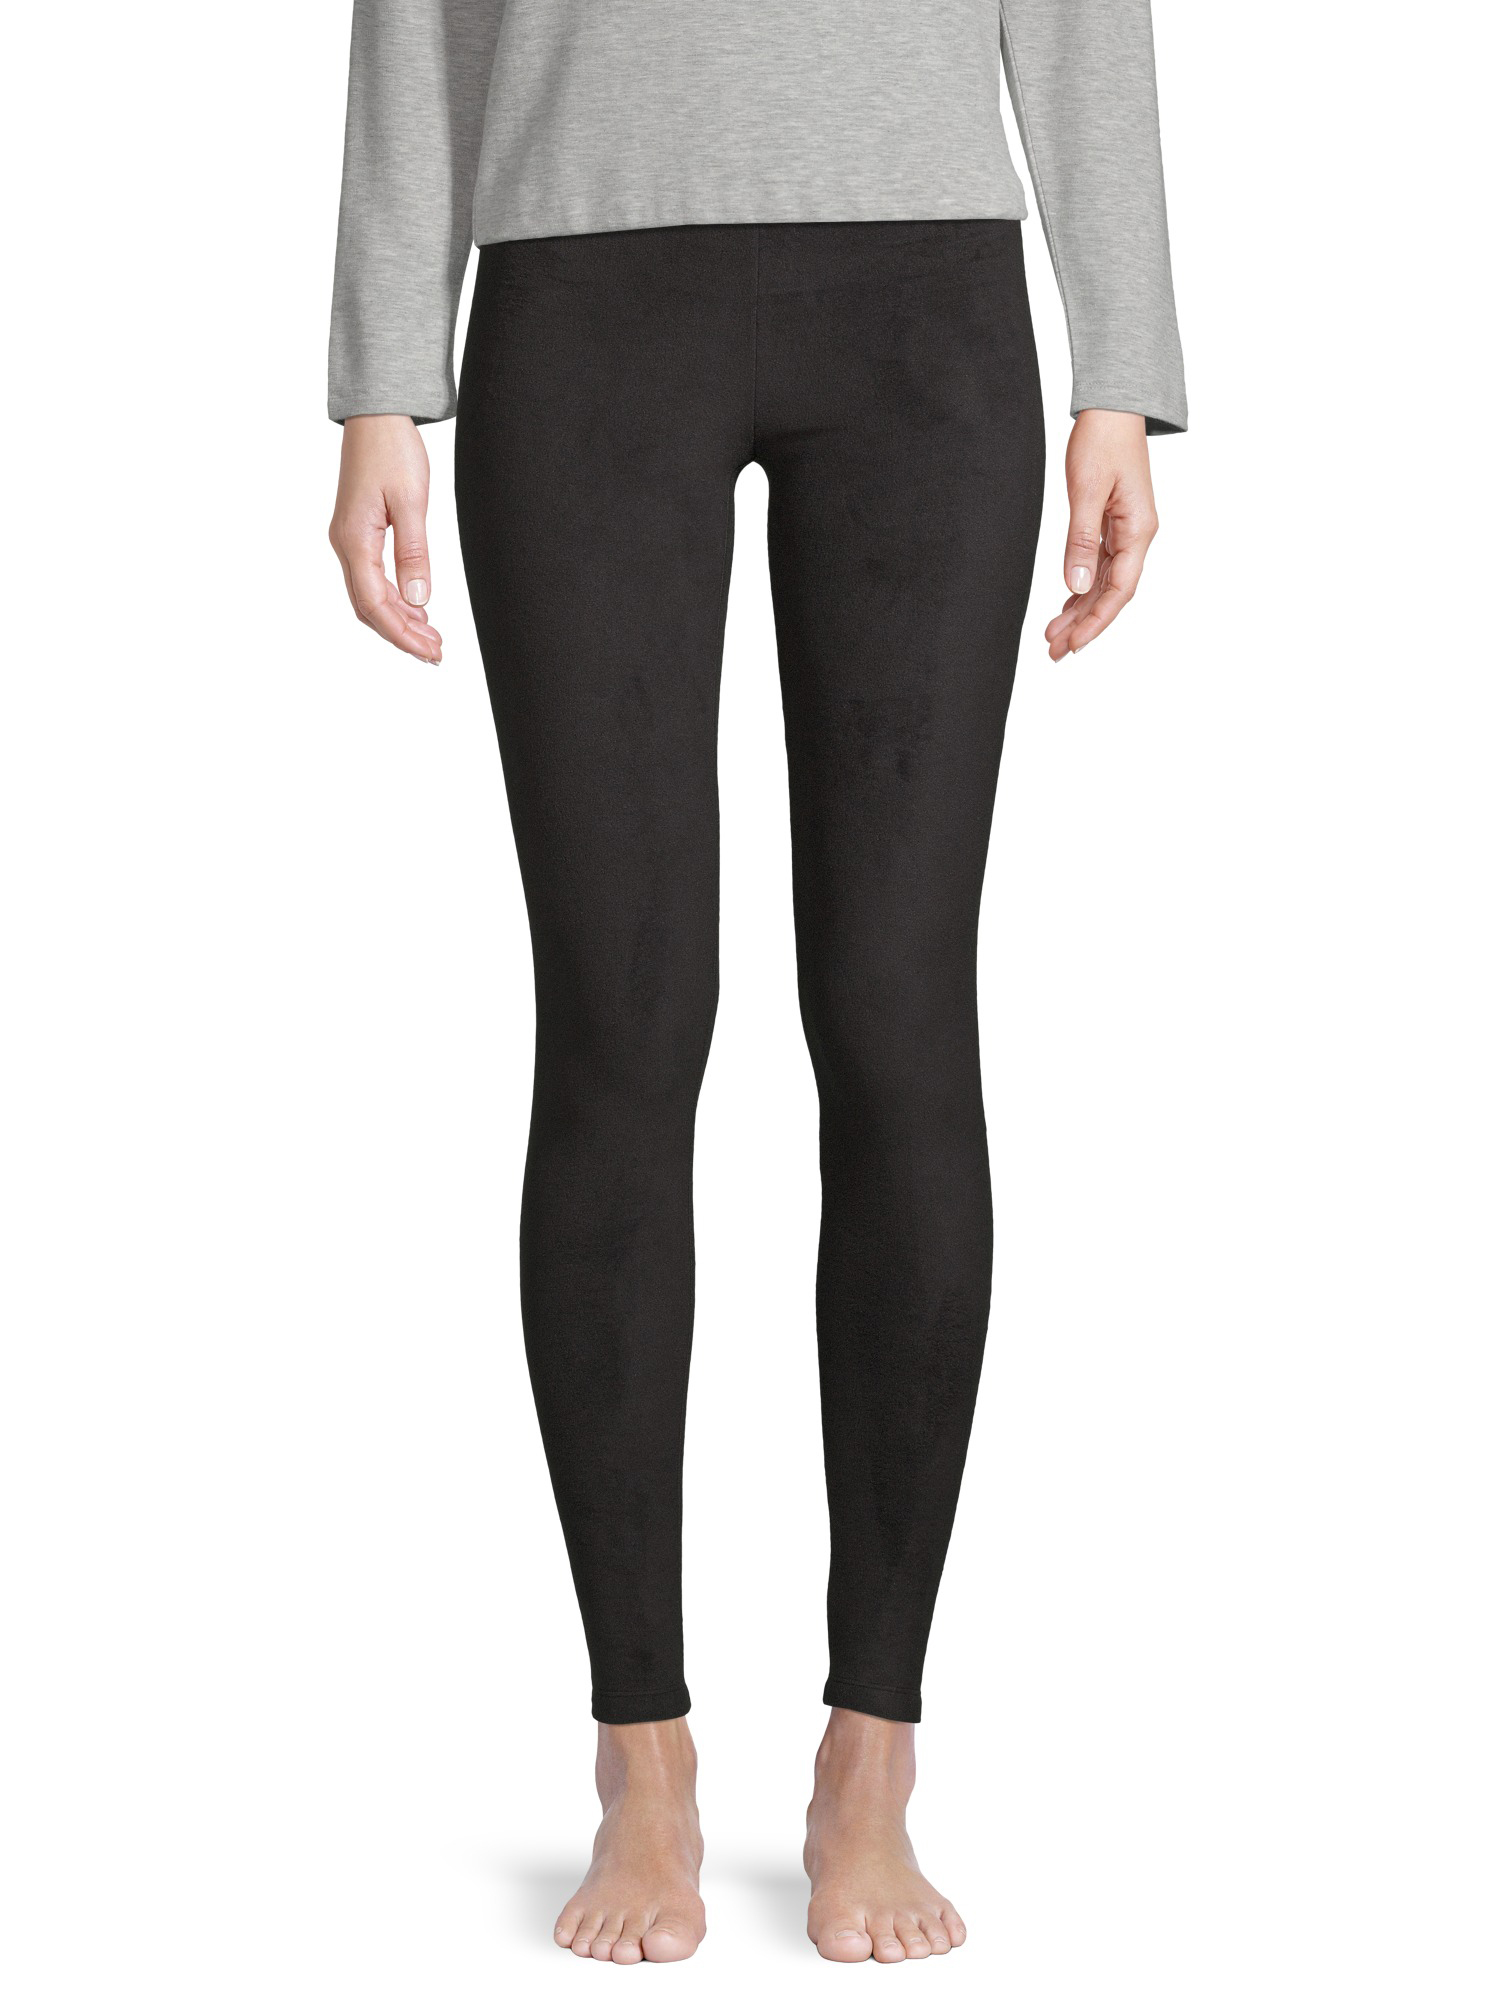 ClimateRight by Cuddl Duds Women's Stretch Fleece Base Layer Natural Rise Thermal Leggings - image 1 of 7